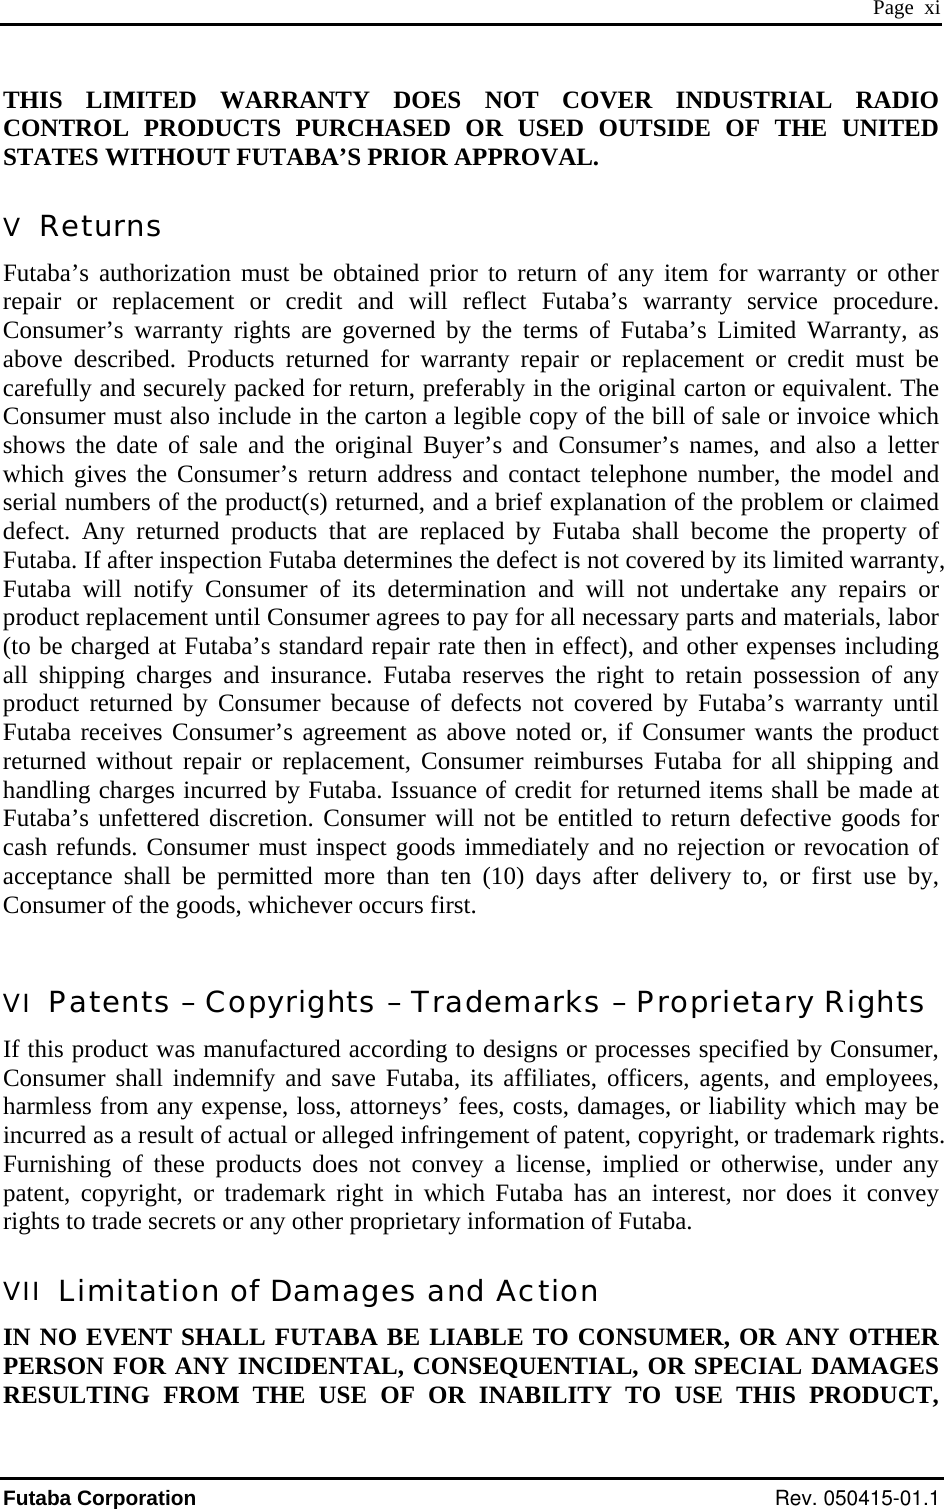  Page  xi THIS LIMITED WARRANTY DOES NOT COVER INDUSTRIAL RADIO CONTROL PRODUCTS PURCHASED OR USED OUTSIDE OF THE UNITED STATES WITHOUT FUTABA’S PRIOR APPROVAL. V  Returns Futaba’s authorization must be obtained prior to return of any item for warranty or other repair or replacement or credit and will reflect Futaba’s warranty service procedure. Consumer’s warranty rights are governed by the terms of Futaba’s Limited Warranty, as above described. Products returned for warranty repair or replacement or credit must be carefully and securely packed for return, preferably in the original carton or equivalent. The Consumer must also include in the carton a legible copy of the bill of sale or invoice which shows the date of sale and the original Buyer’s and Consumer’s names, and also a letter which gives the Consumer’s return address and contact telephone number, the model and serial numbers of the product(s) returned, and a brief explanation of the problem or claimed defect. Any returned products that are replaced by Futaba shall become the property of Futaba. If after inspection Futaba determines the defect is not covered by its limited warranty, Futaba will notify Consumer of its determination and will not undertake any repairs or product replacement until Consumer agrees to pay for all necessary parts and materials, labor (to be charged at Futaba’s standard repair rate then in effect), and other expenses including all shipping charges and insurance. Futaba reserves the right to retain possession of any product returned by Consumer because of defects not covered by Futaba’s warranty until Futaba receives Consumer’s agreement as above noted or, if Consumer wants the product returned without repair or replacement, Consumer reimburses Futaba for all shipping and handling charges incurred by Futaba. Issuance of credit for returned items shall be made at Futaba’s unfettered discretion. Consumer will not be entitled to return defective goods for cash refunds. Consumer must inspect goods immediately and no rejection or revocation of acceptance shall be permitted more than ten (10) days after delivery to, or first use by, Consumer of the goods, whichever occurs first.  VI  Patents – Copyrights – Trademarks – Proprietary Rights If this product was manufactured according to designs or processes specified by Consumer, Consumer shall indemnify and save Futaba, its affiliates, officers, agents, and employees, harmless from any expense, loss, attorneys’ fees, costs, damages, or liability which may be incurred as a result of actual or alleged infringement of patent, copyright, or trademark rights. Furnishing of these products does not convey a license, implied or otherwise, under any patent, copyright, or trademark right in which Futaba has an interest, nor does it convey rights to trade secrets or any other proprietary information of Futaba. VII  Limitation of Damages and Action IN NO EVENT SHALL FUTABA BE LIABLE TO CONSUMER, OR ANY OTHER PERSON FOR ANY INCIDENTAL, CONSEQUENTIAL, OR SPECIAL DAMAGES RESULTING FROM THE USE OF OR INABILITY TO USE THIS PRODUCT, Futaba Corporation Rev. 050415-01.1 